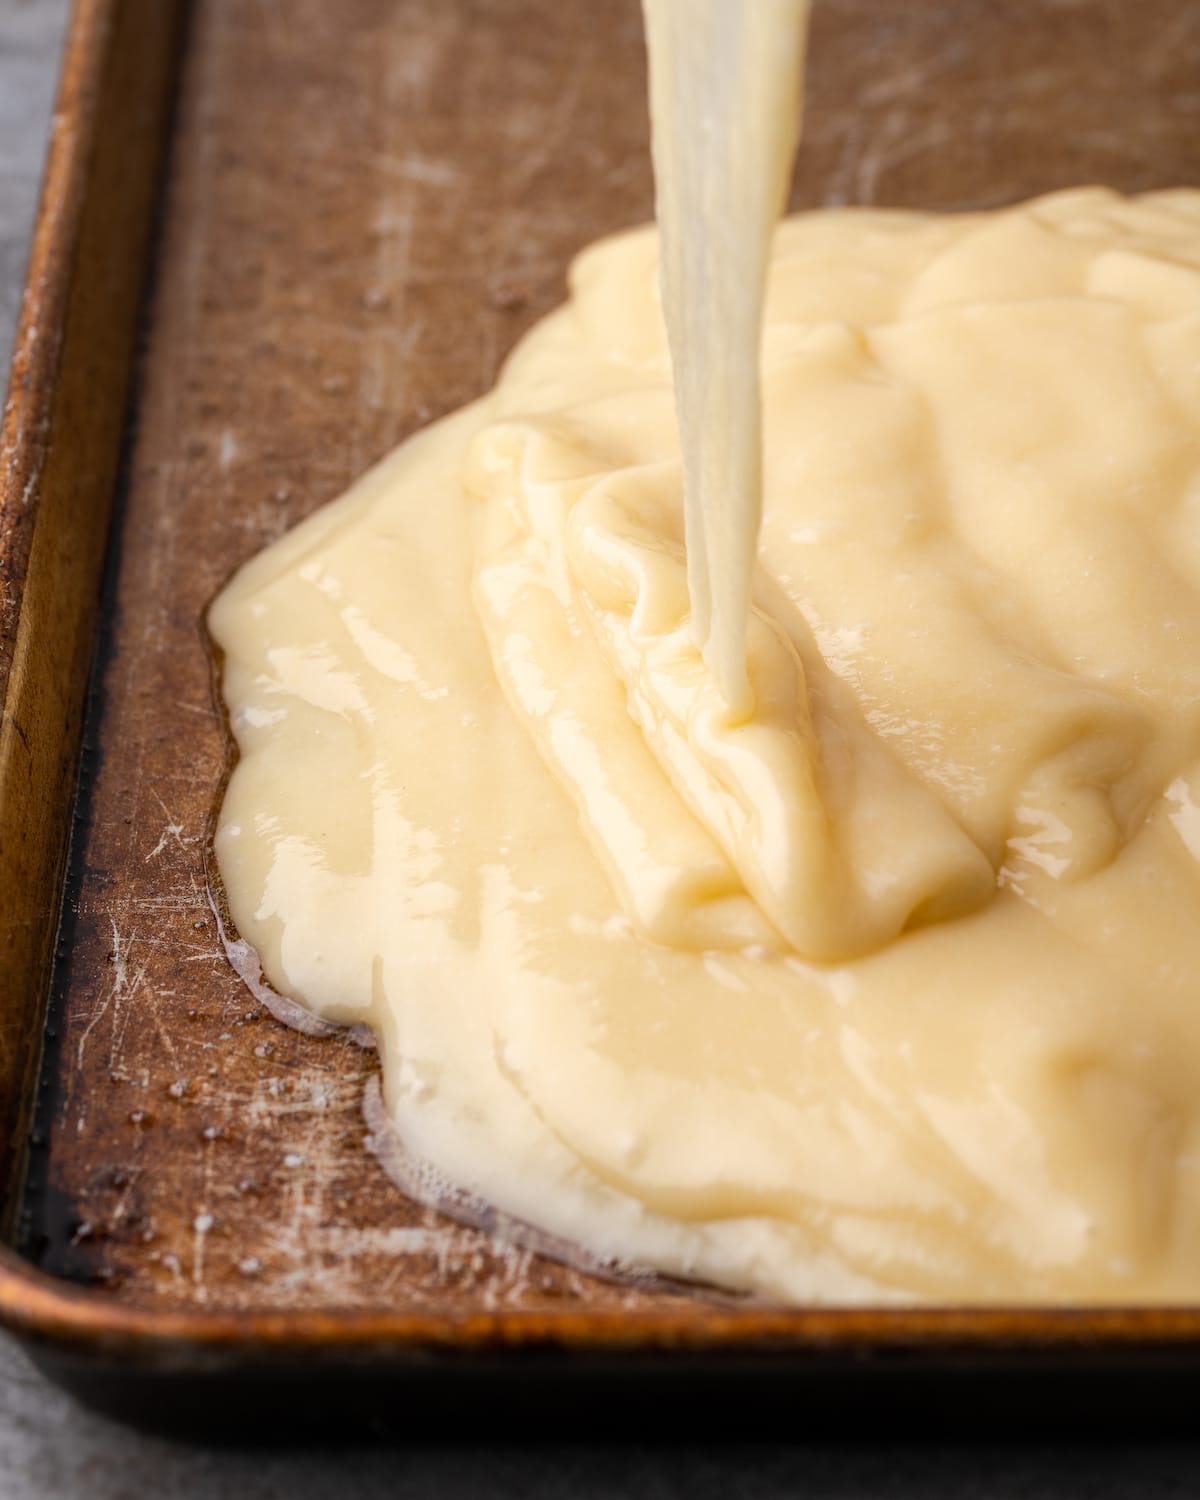 Buttermilk cake batter is poured into a greased metal sheet pan.